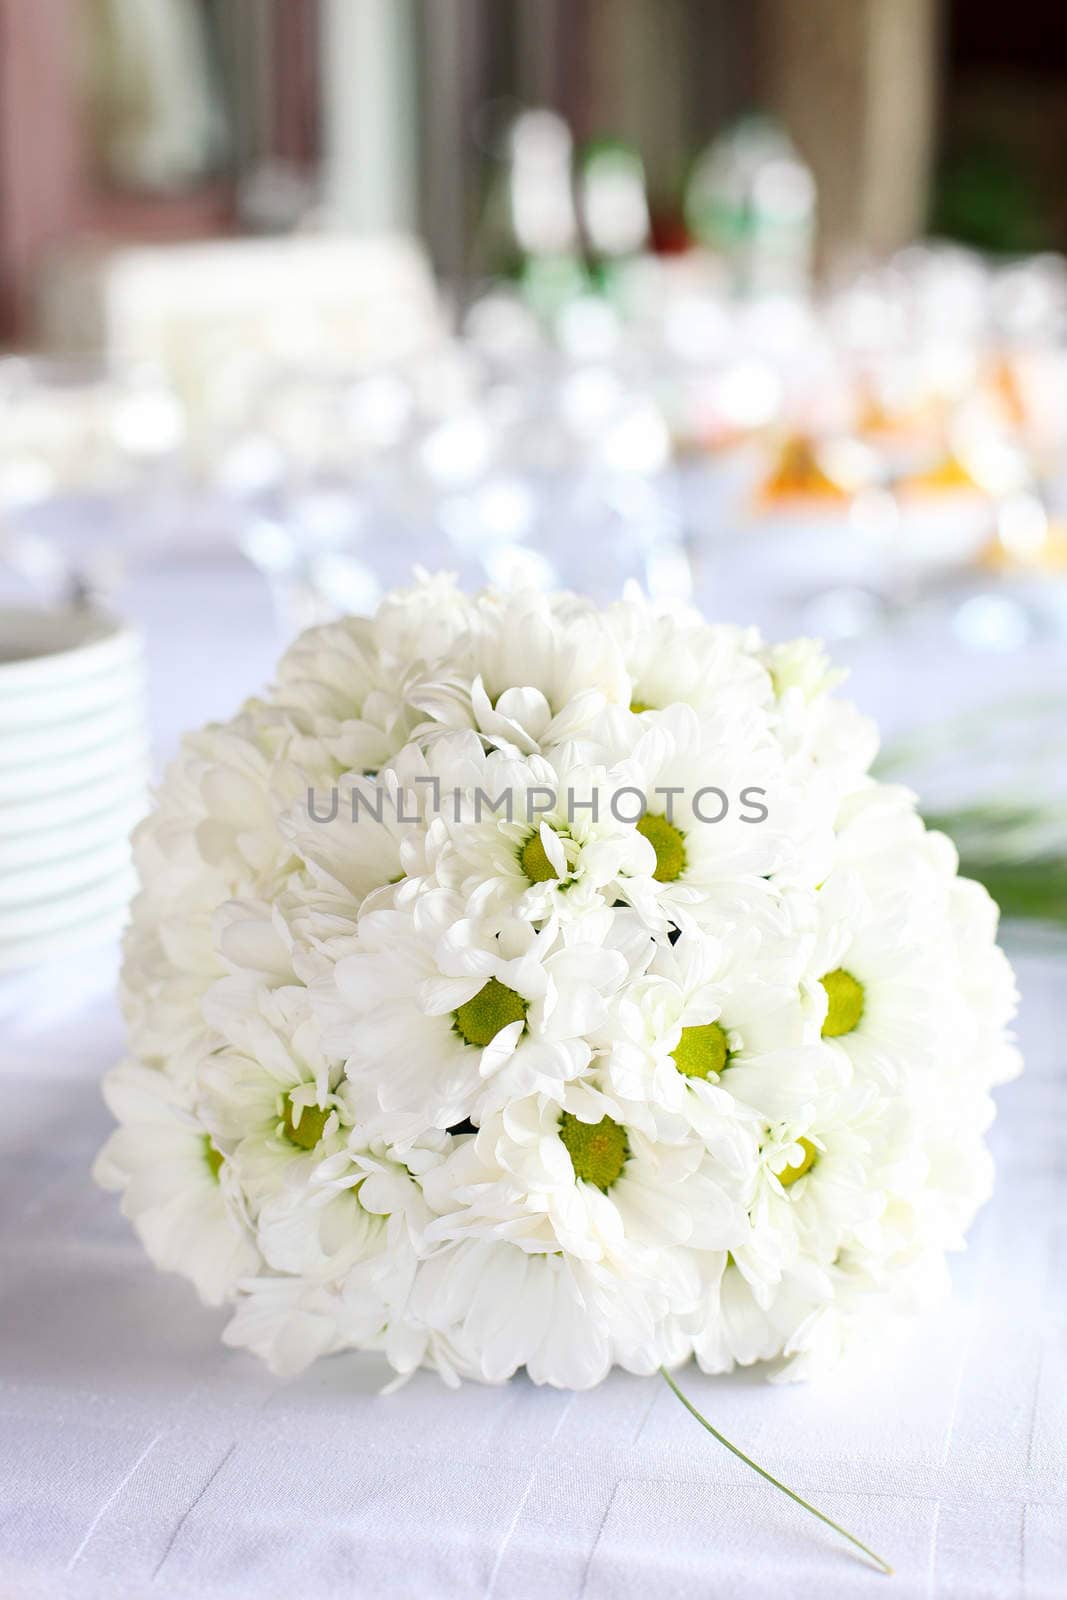 Decoration of dining table for wedding reception by photobac